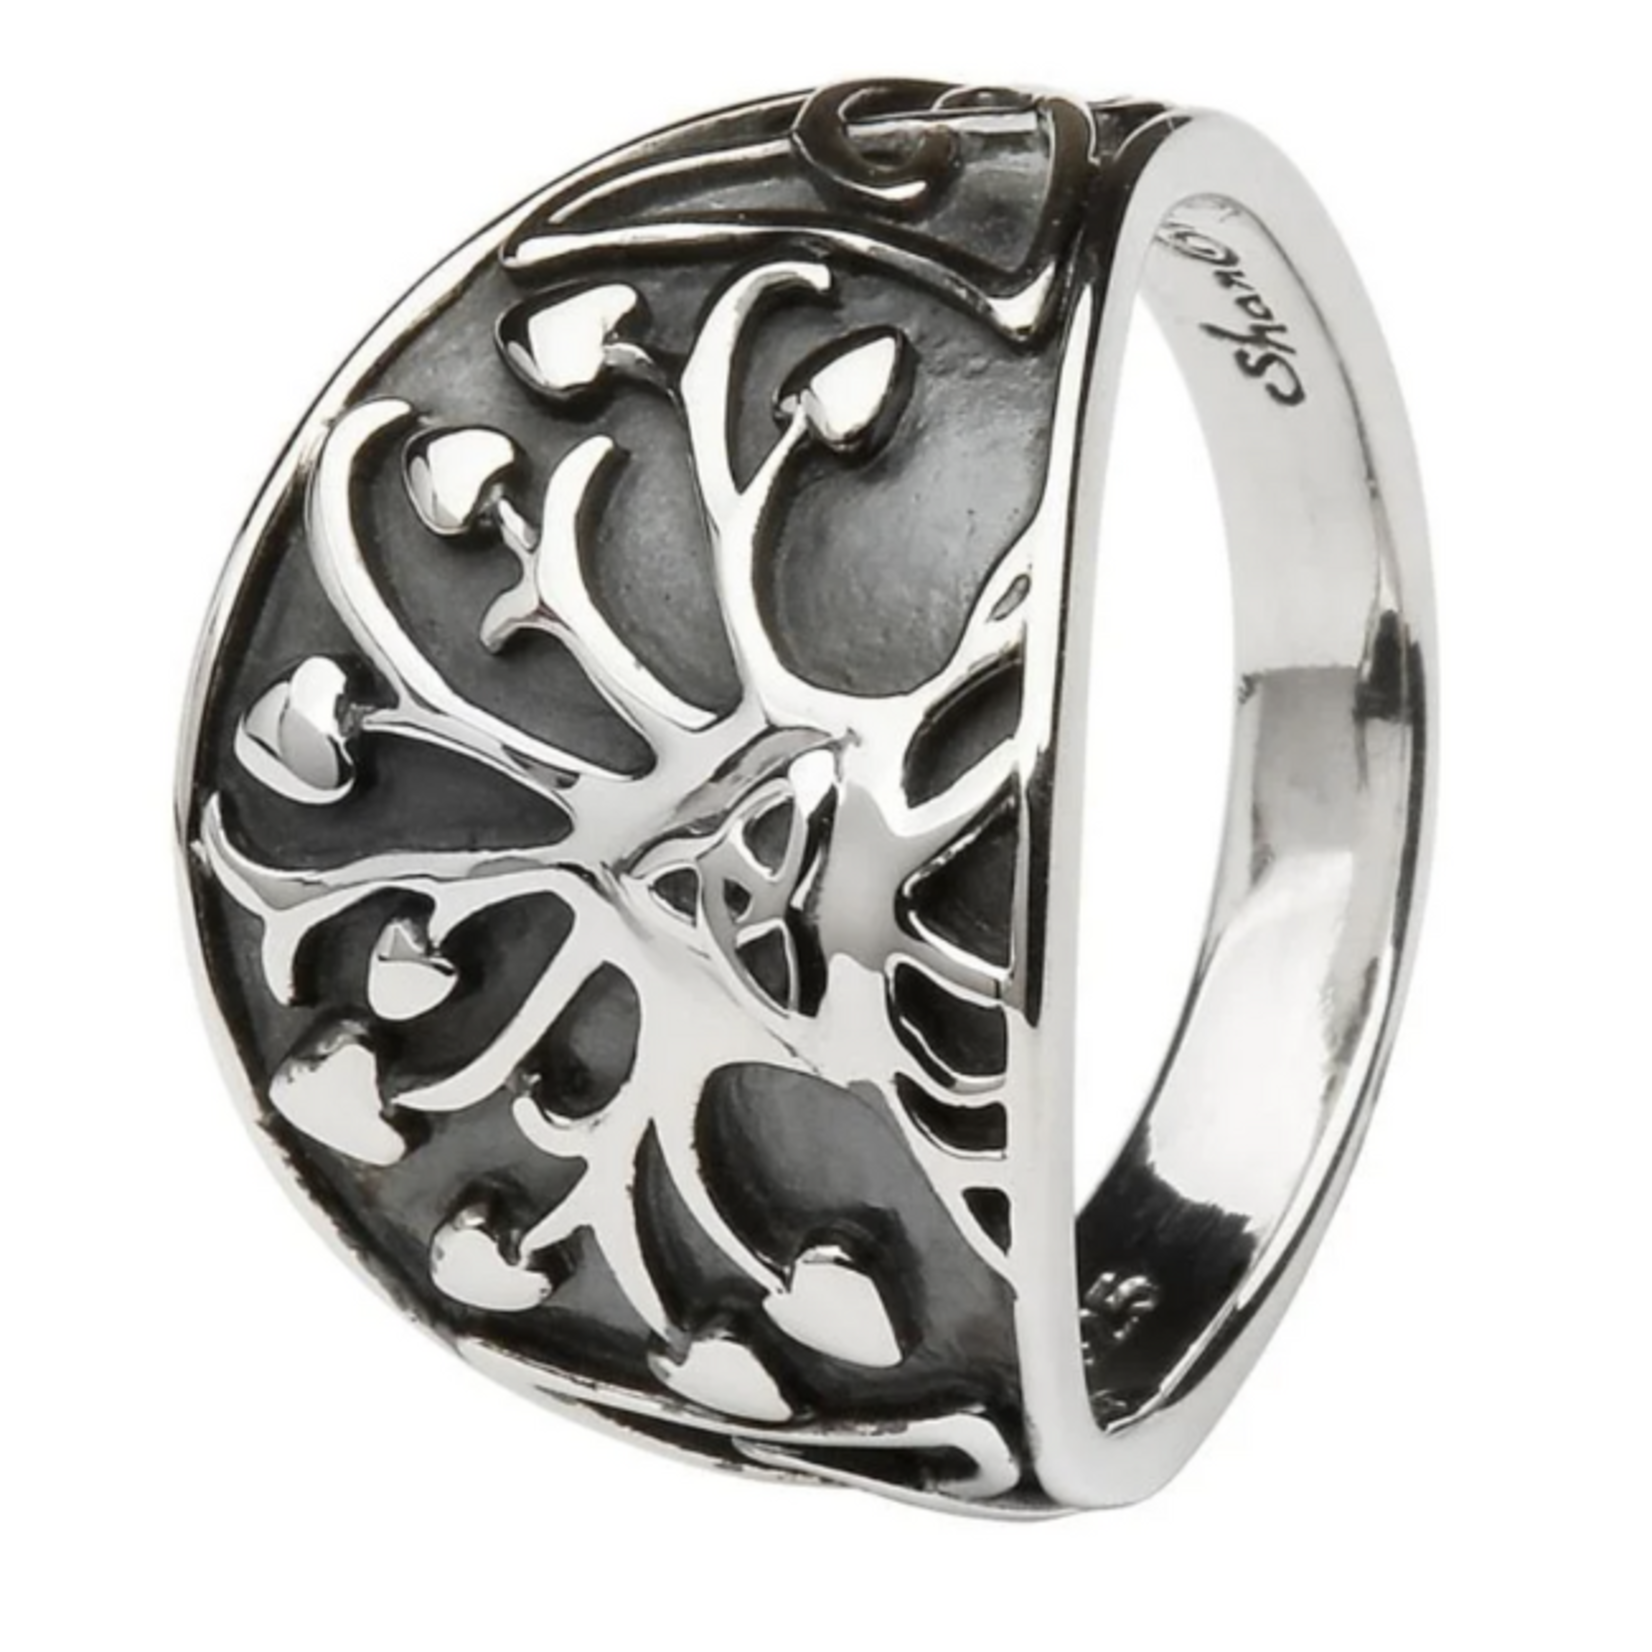 Shanore S/S Tree of Life Ring